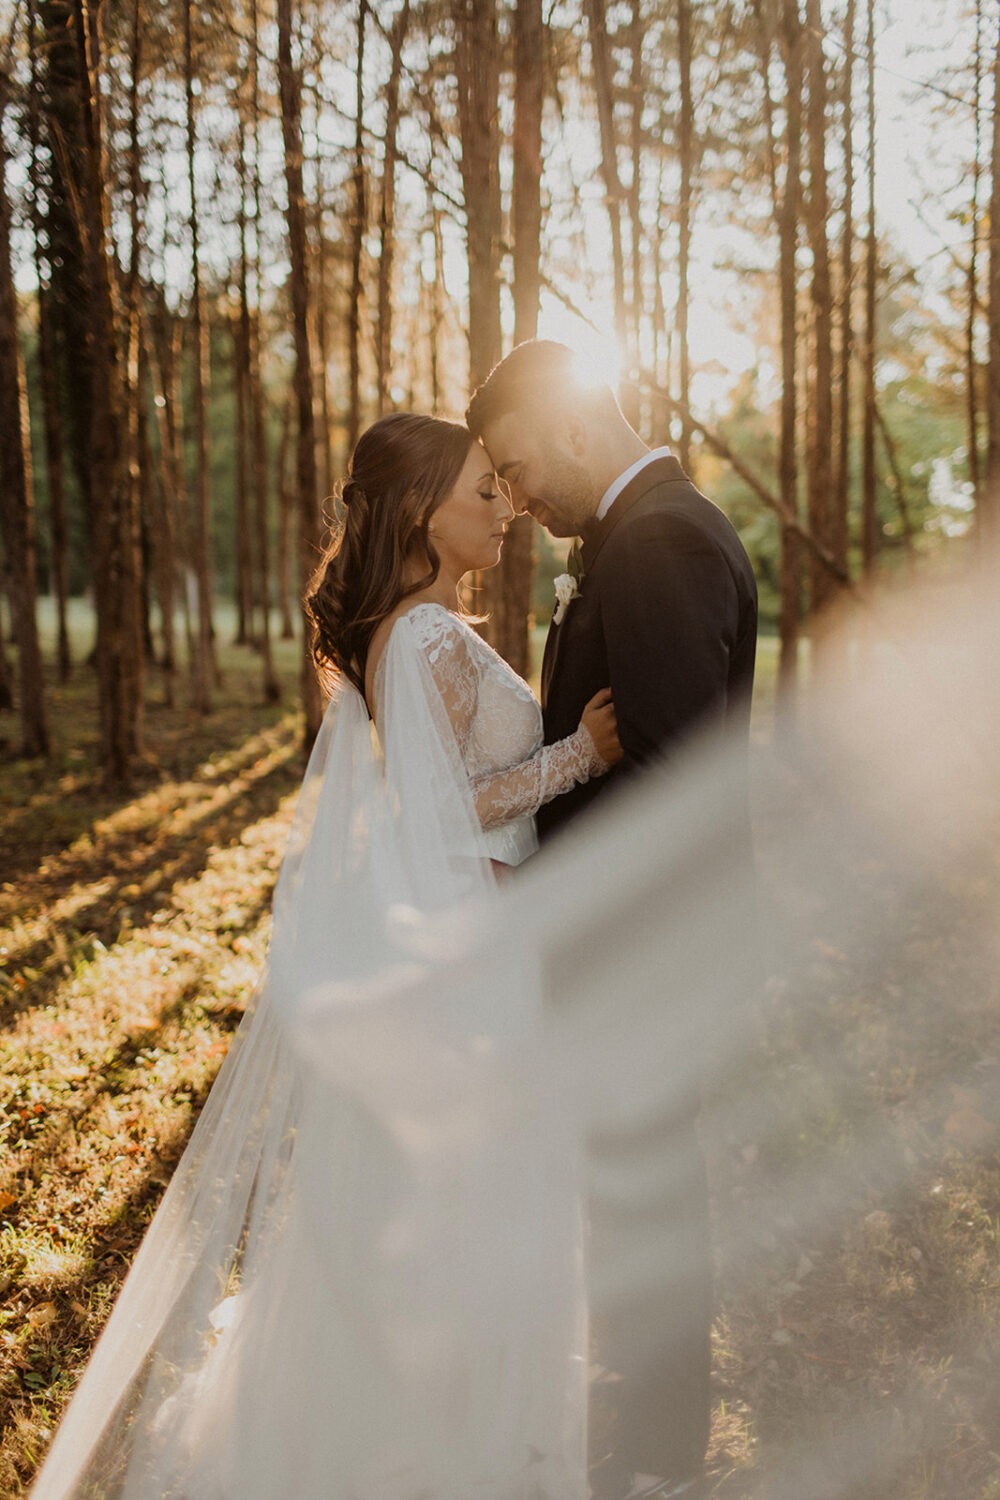 couple embraces in sunset woods at traditional Jewish wedding